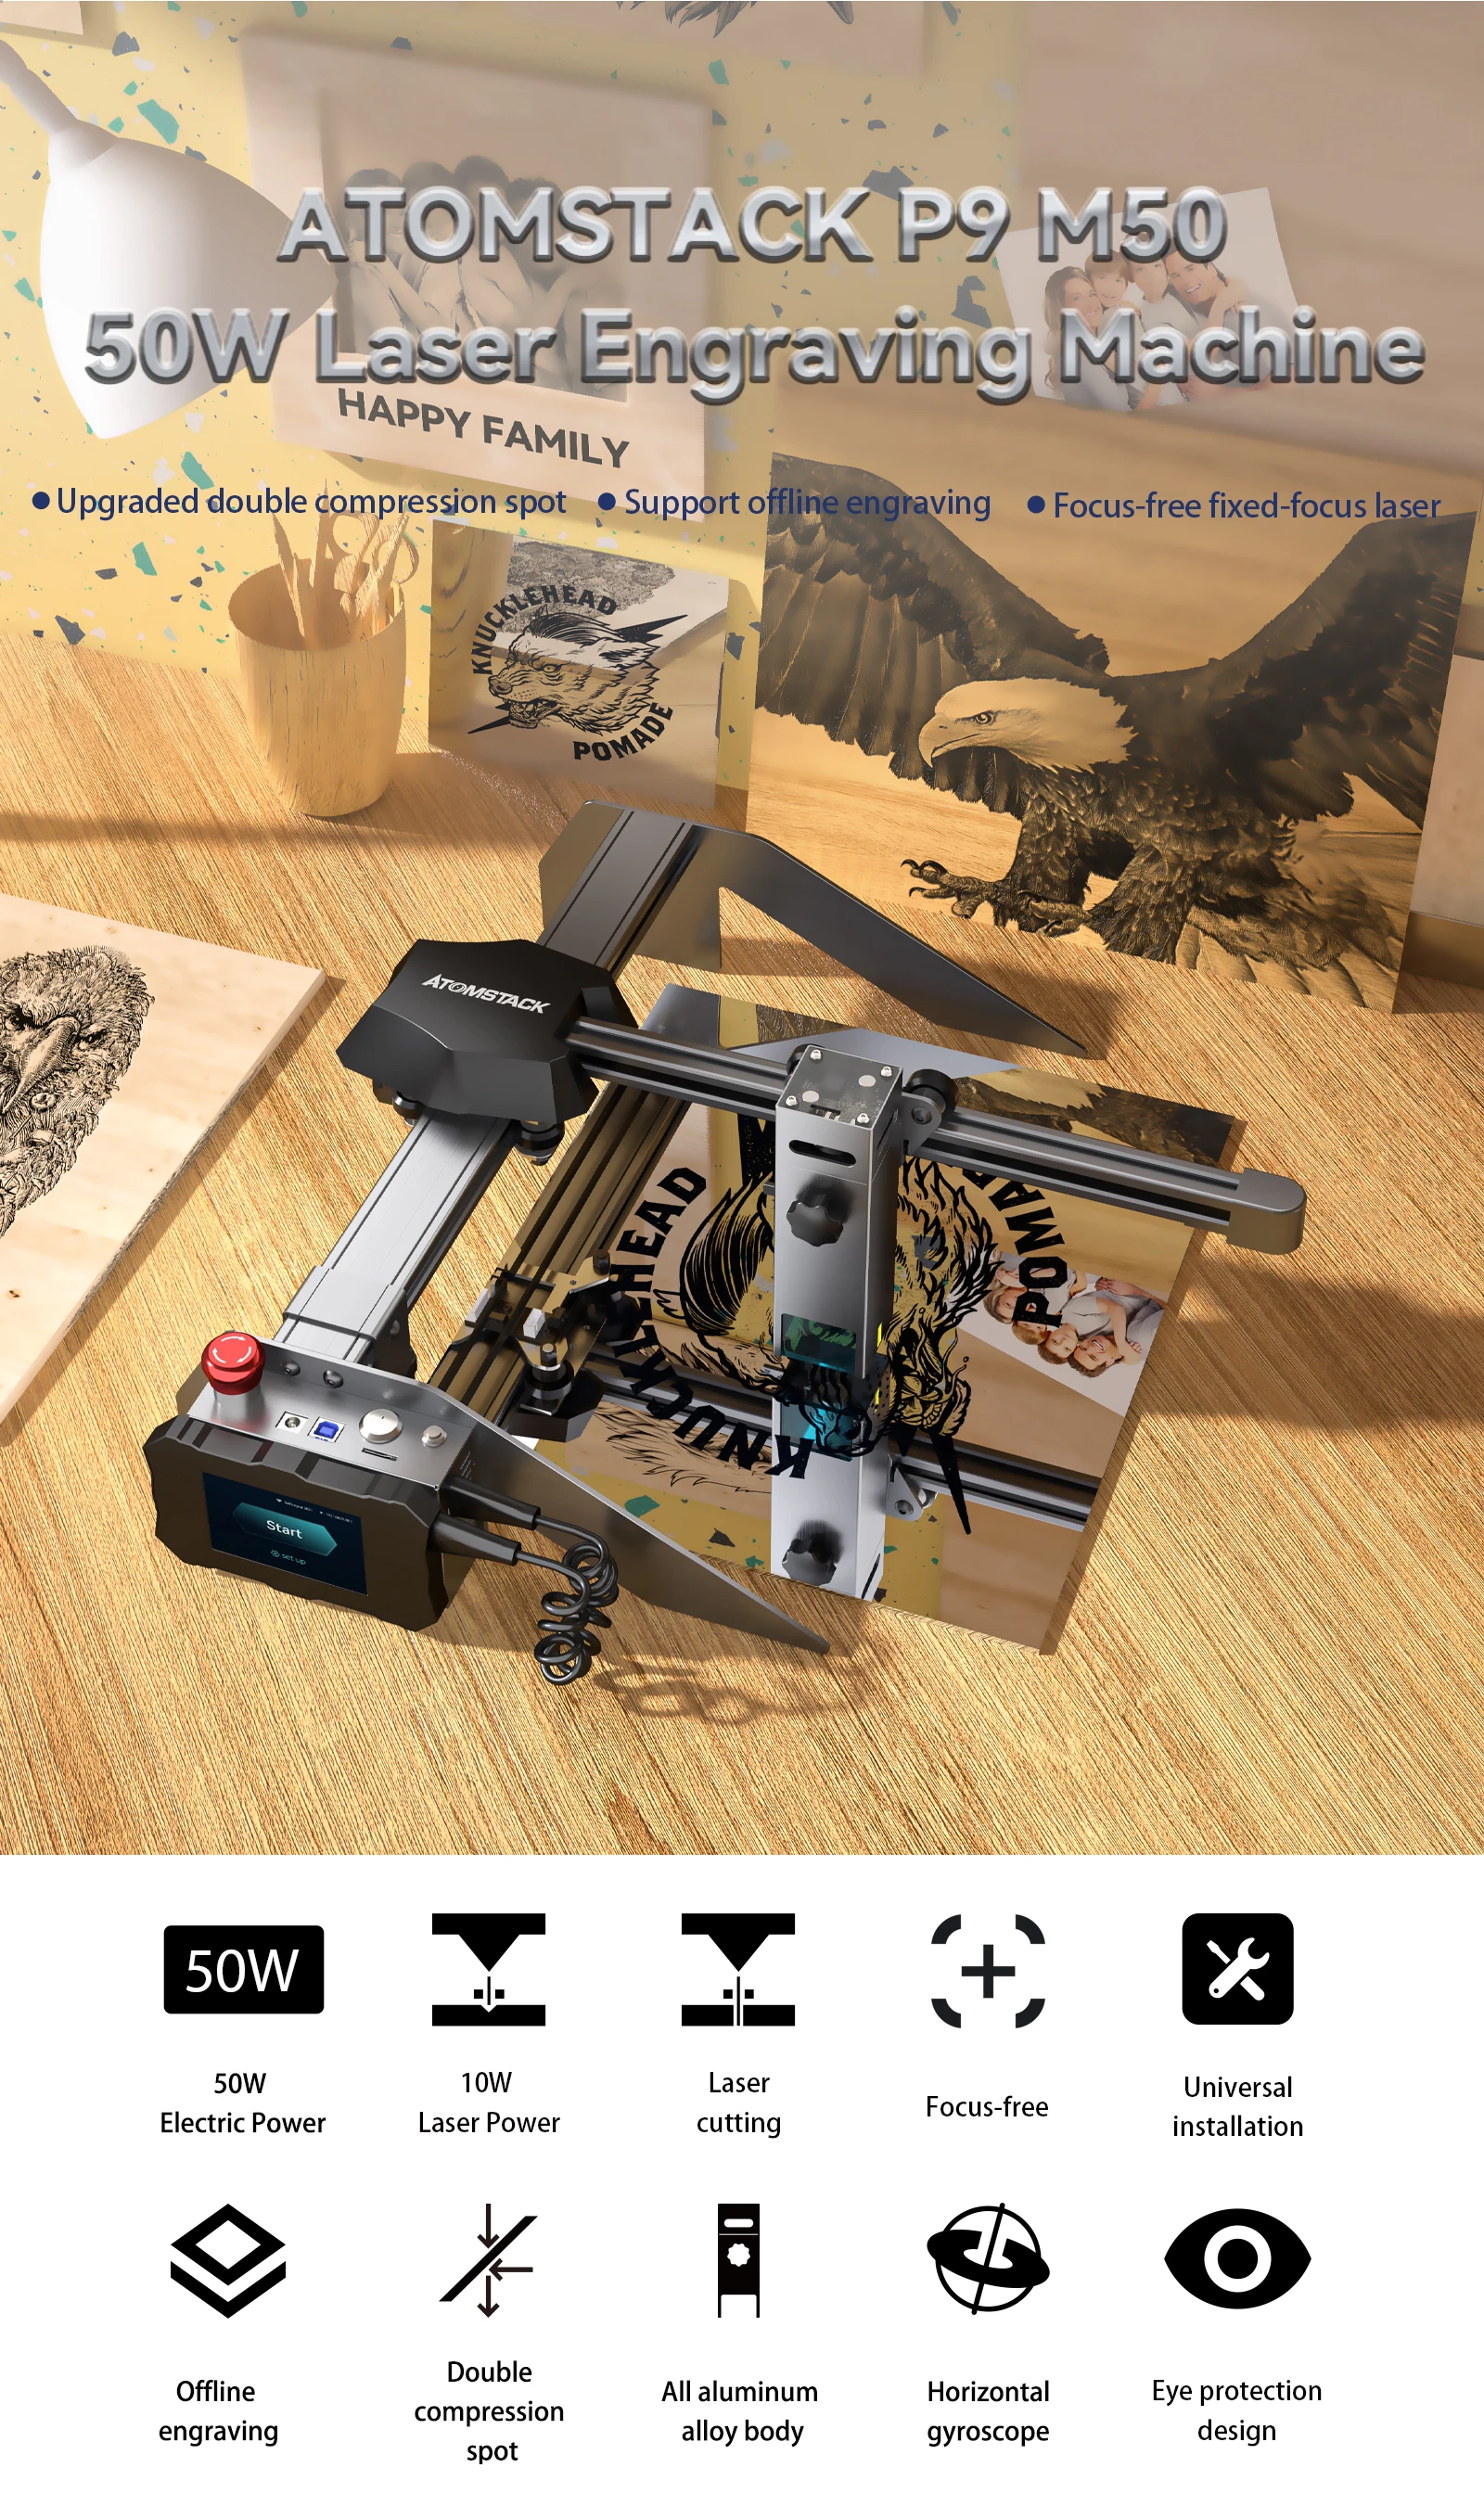 The Atomstack P9 M50 - A great 10W laser engraver in a small package 